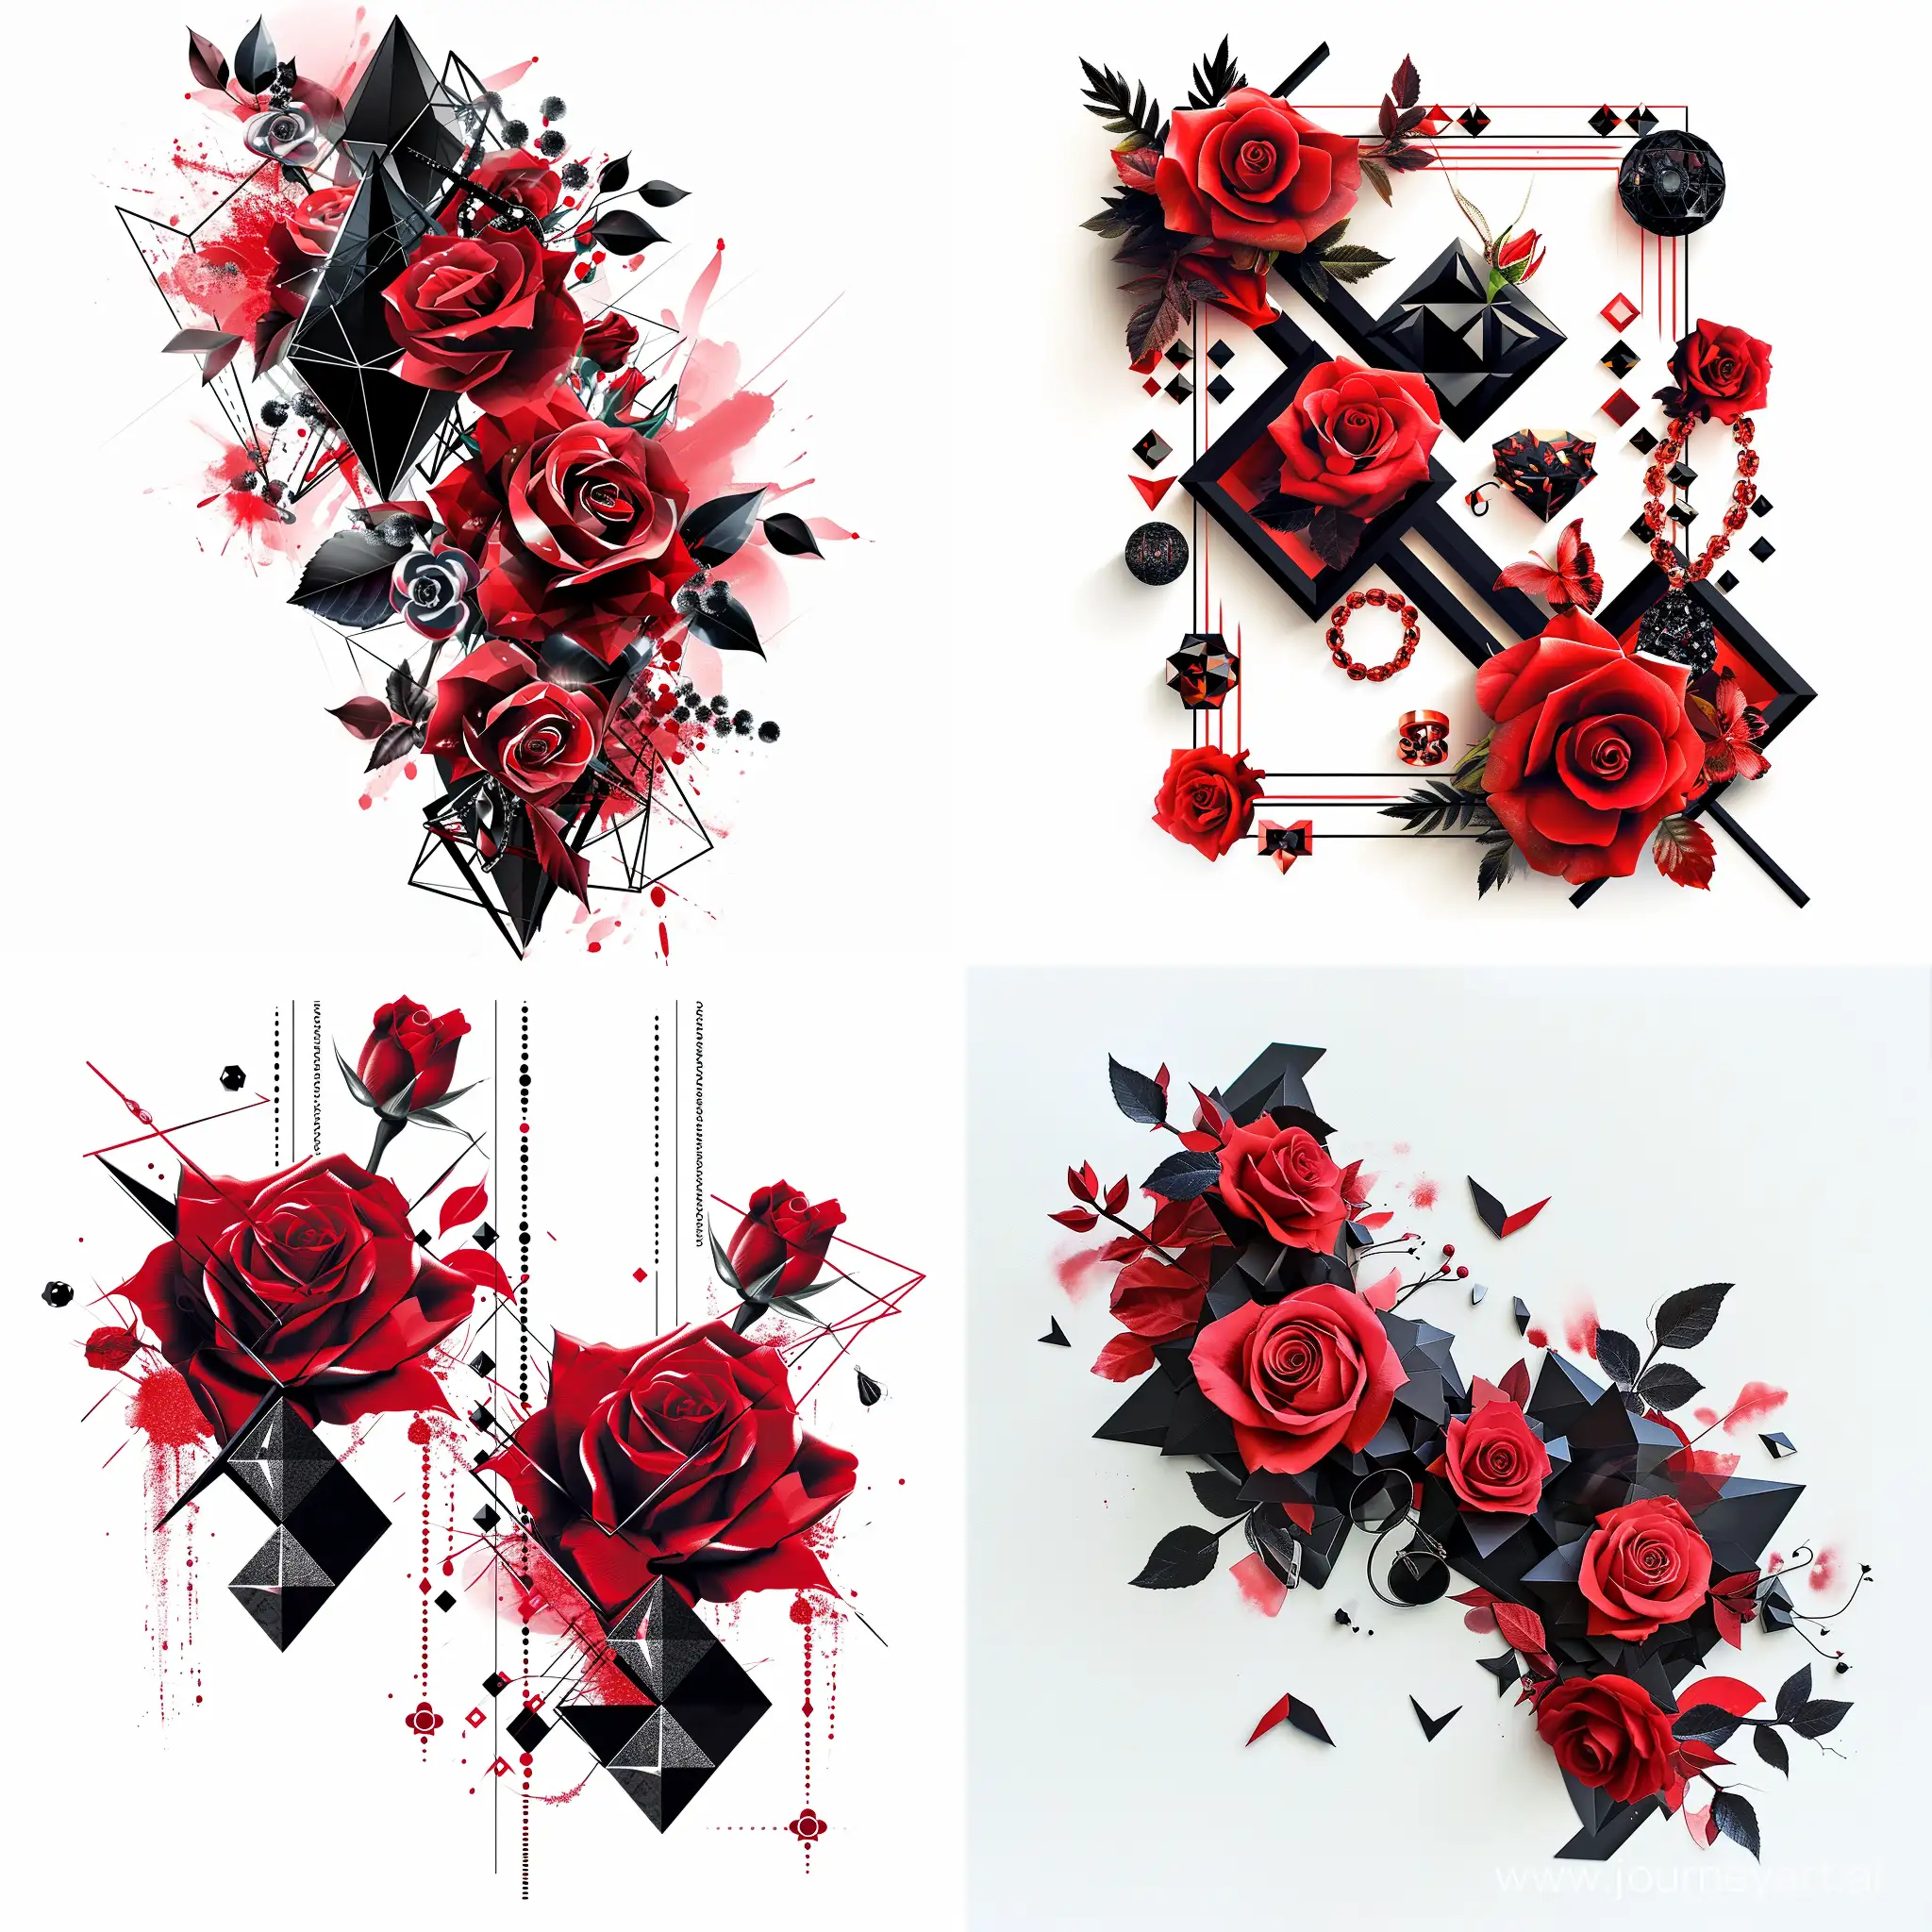 geometric ornament of fashion accessories, roses, colors red, black, on a white background